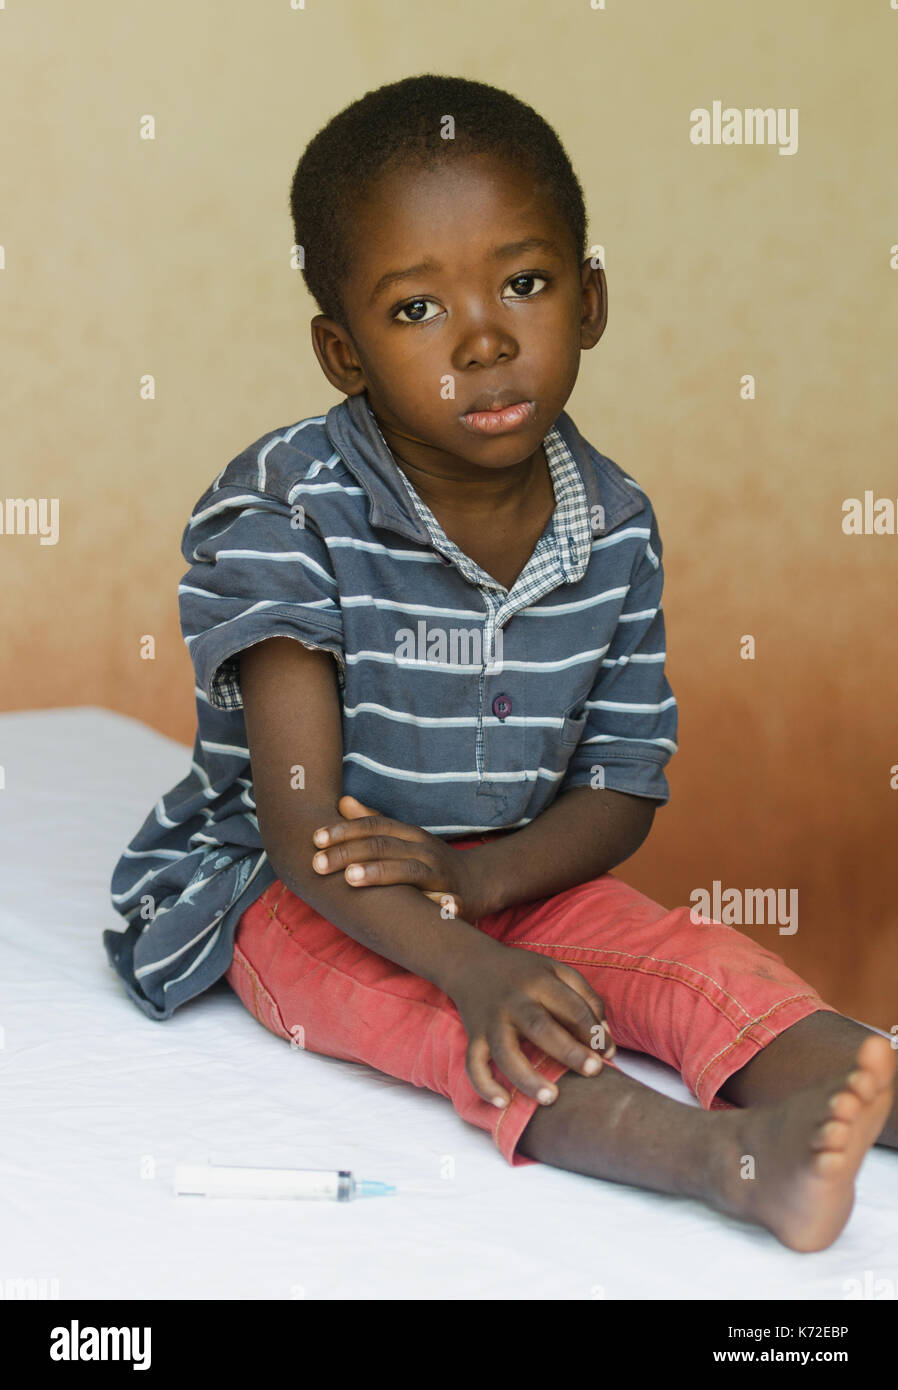 Little boy sitting in a hospital waiting to get an injection Stock Photo